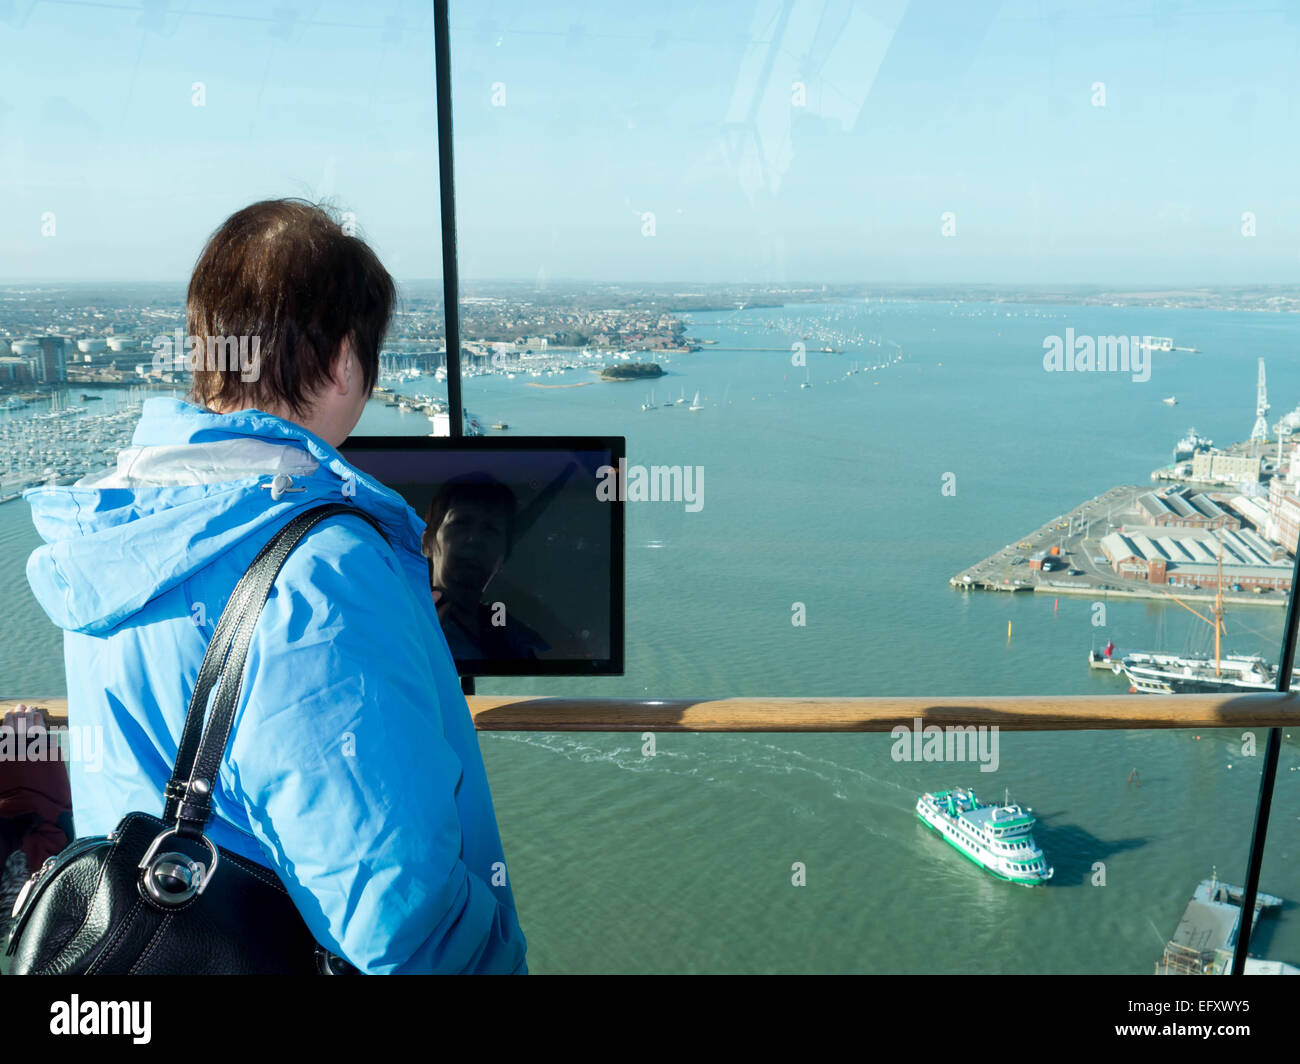 A lady uses a touchpad information point in the Spinnaker tower, Portsmouth, England Stock Photo